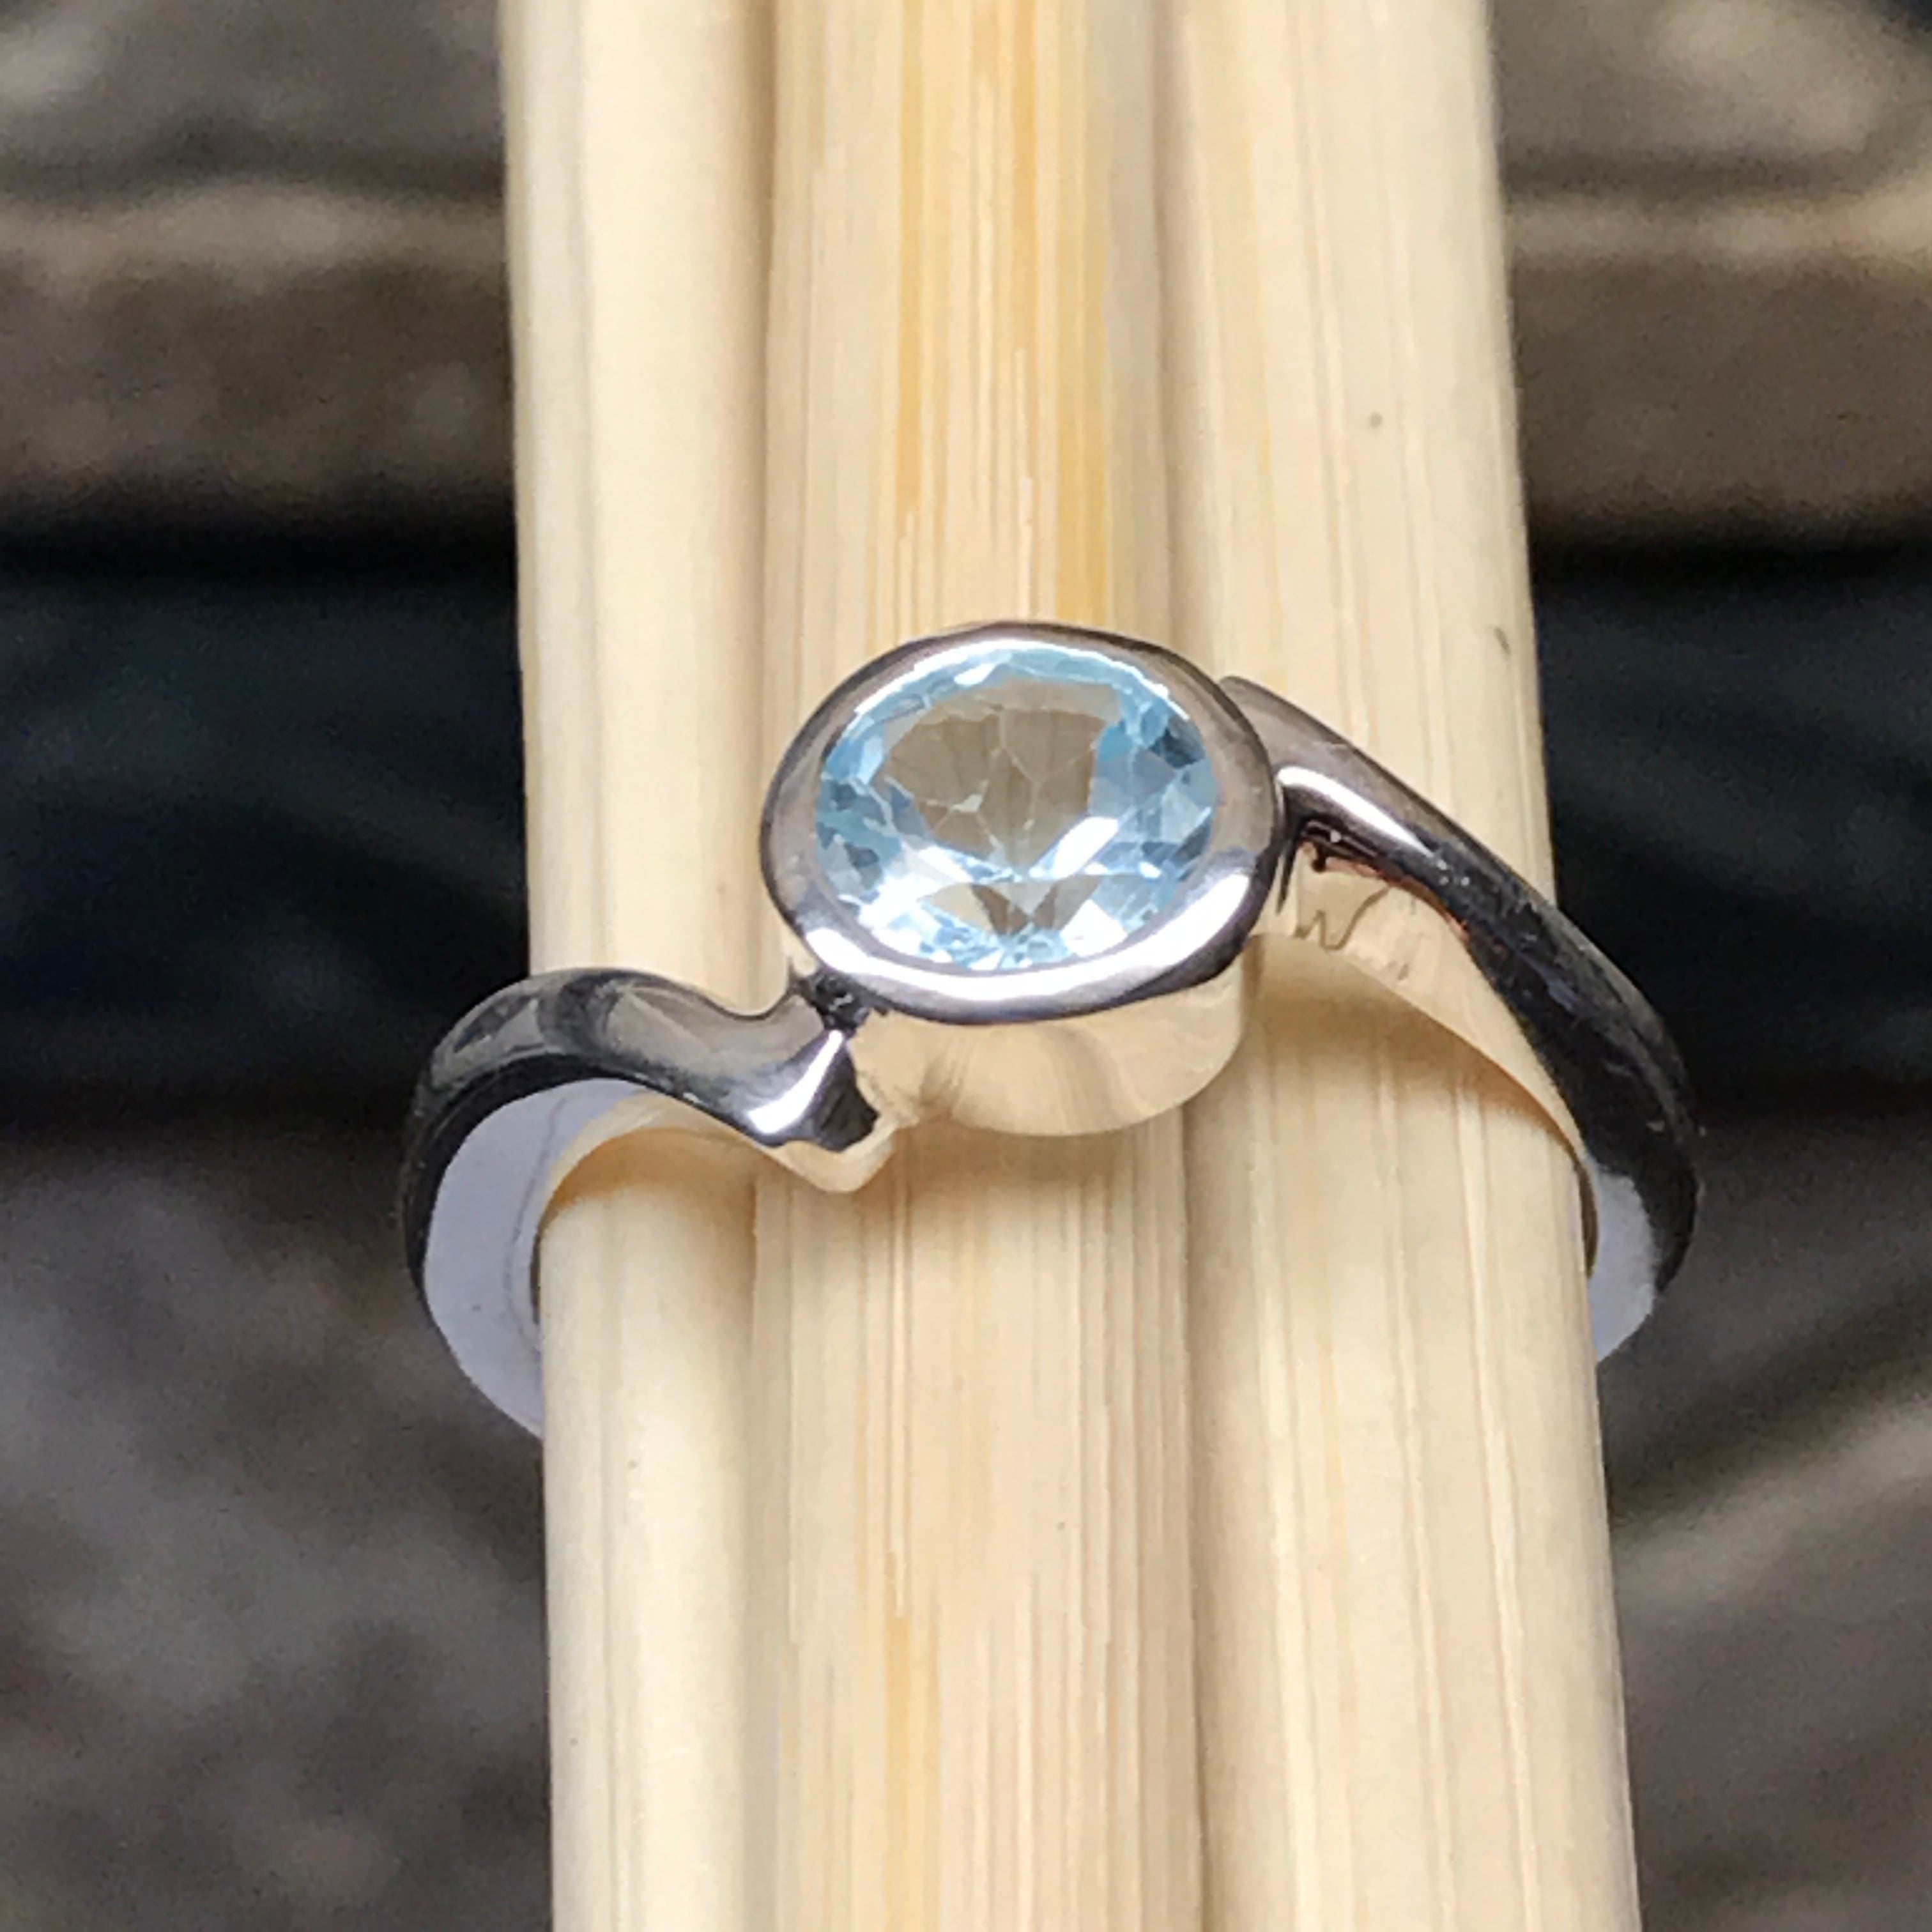 Genuine 1ct Swiss Blue Topaz 925 Solid Sterling Silver Engagement Ring Size 6, 8, 9 - Natural Rocks by Kala